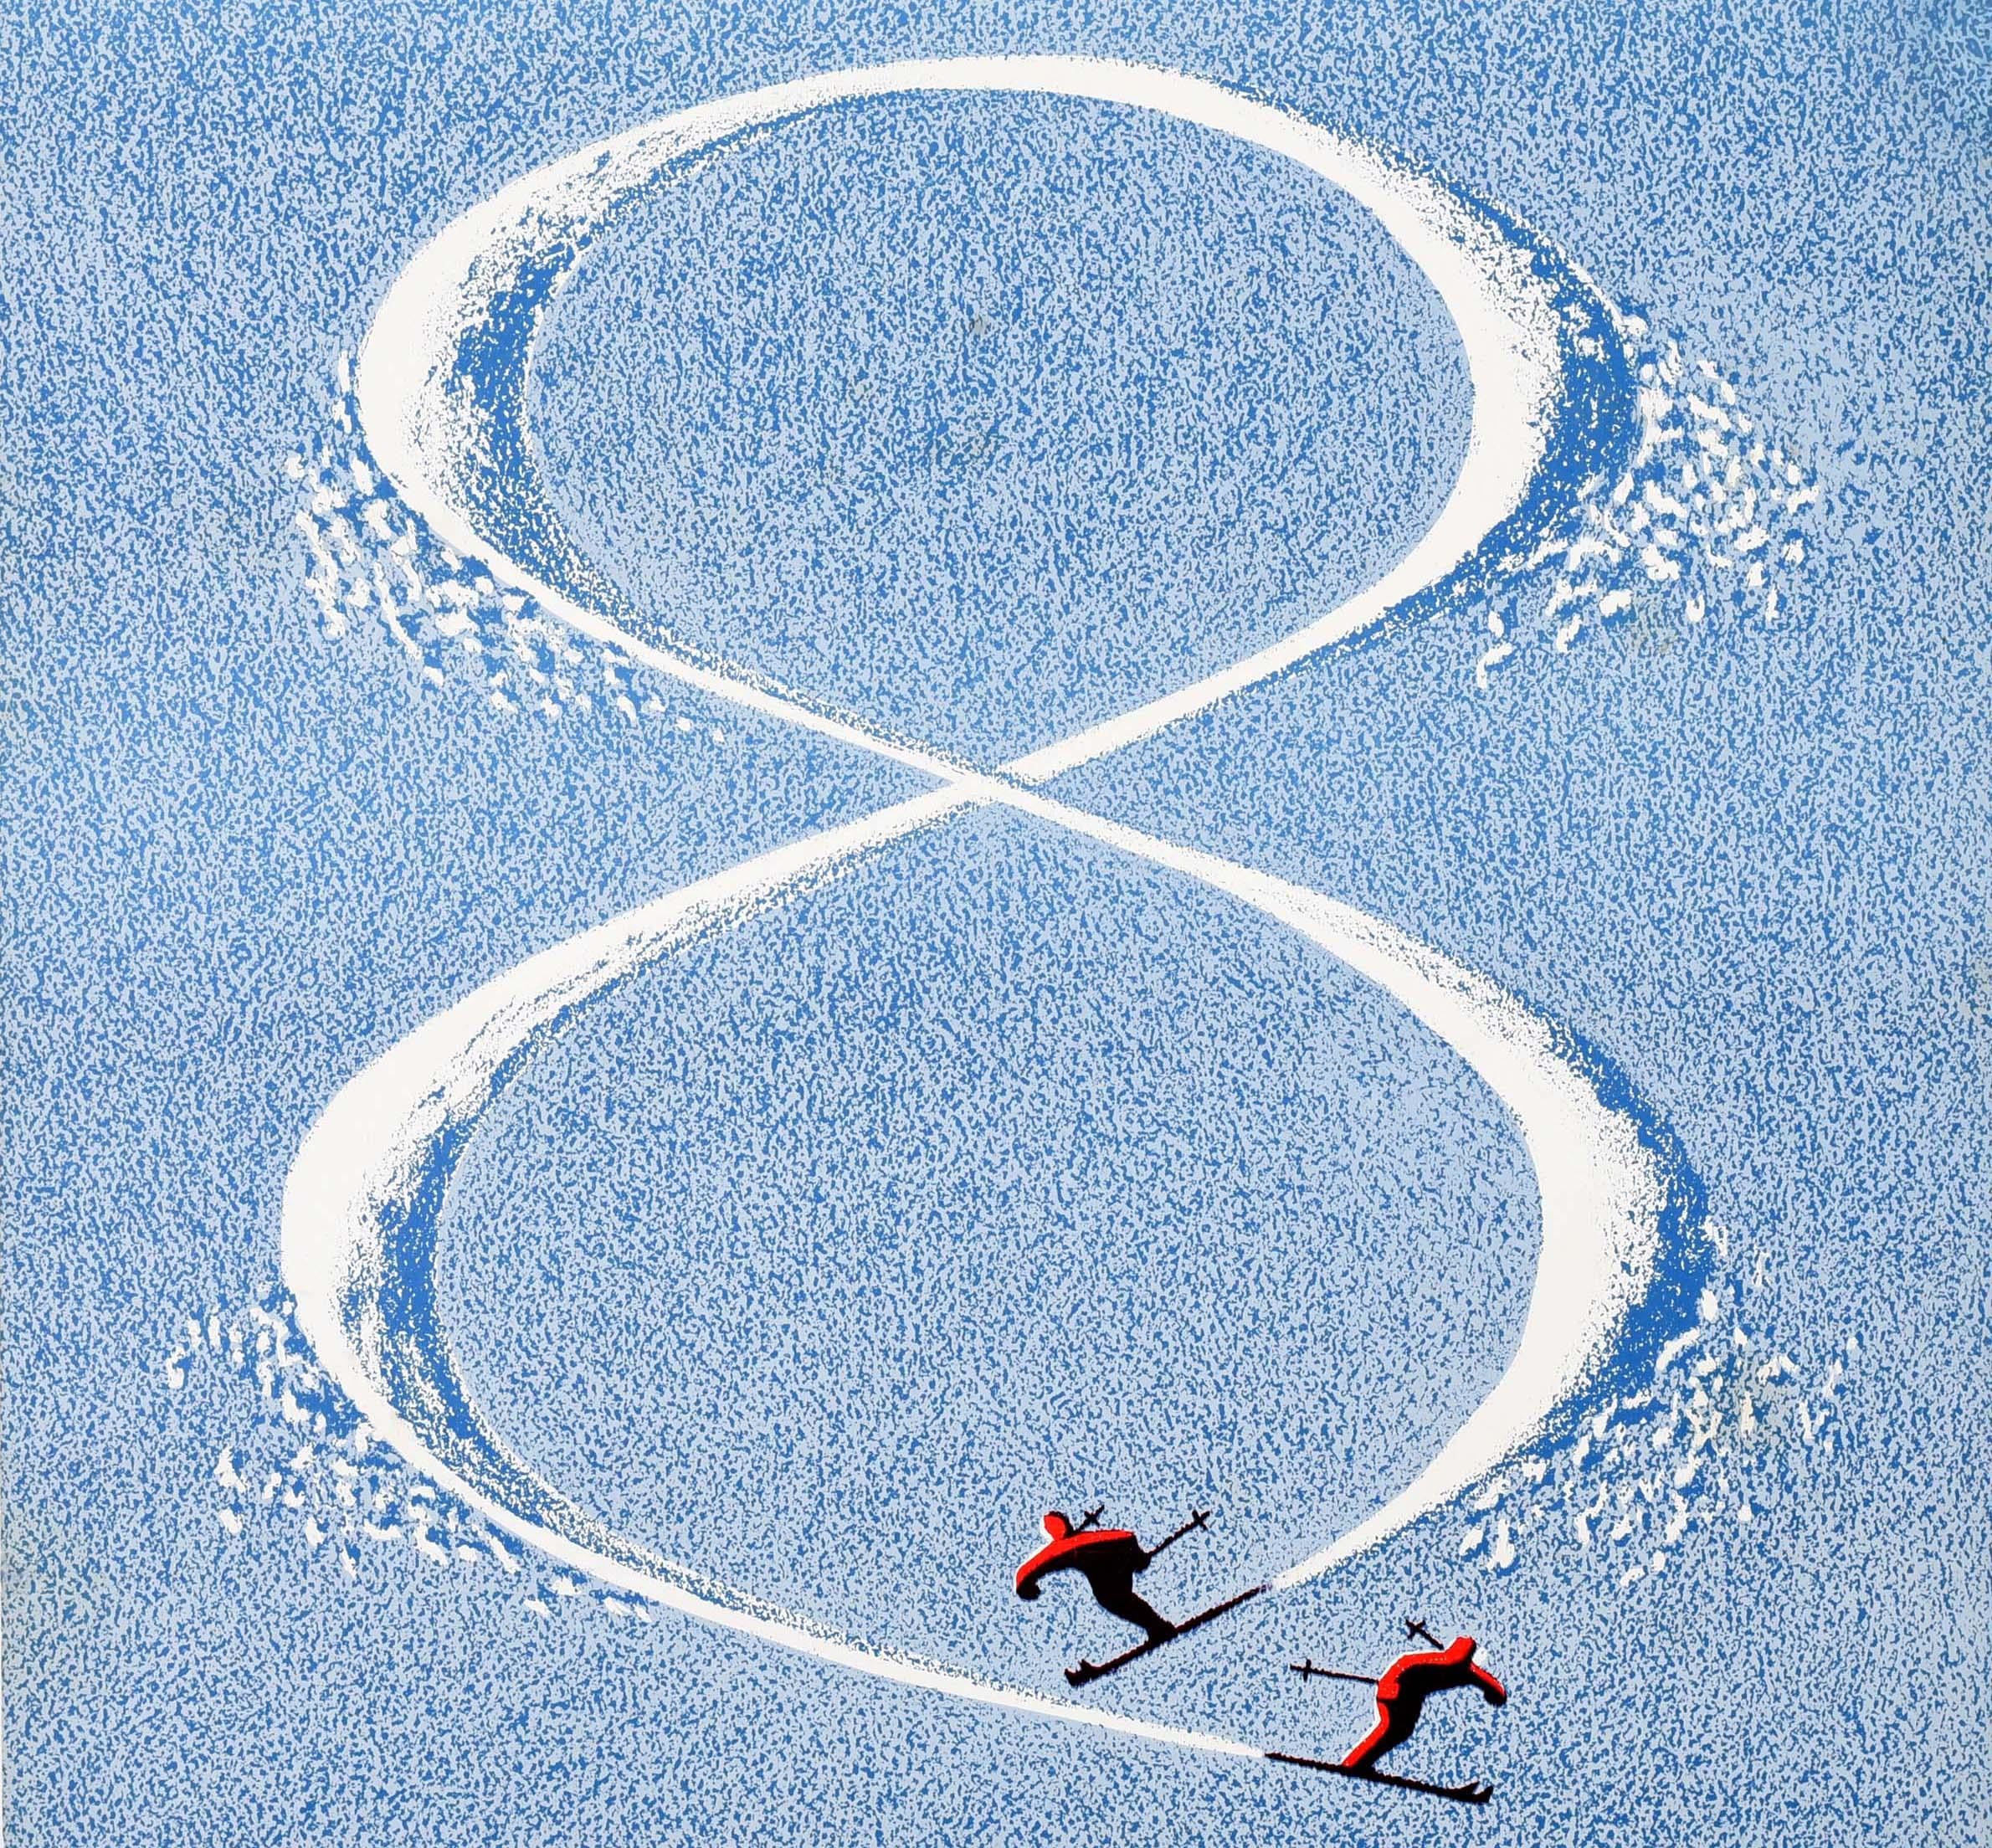 Original vintage winter sport poster for the 8. Interski Aspen Colorado USA 1968 19-28 April. Great design depicting two skiers in red skiing down a slope across each other to form the number 8 in the snow with the text below. The popular ski resort